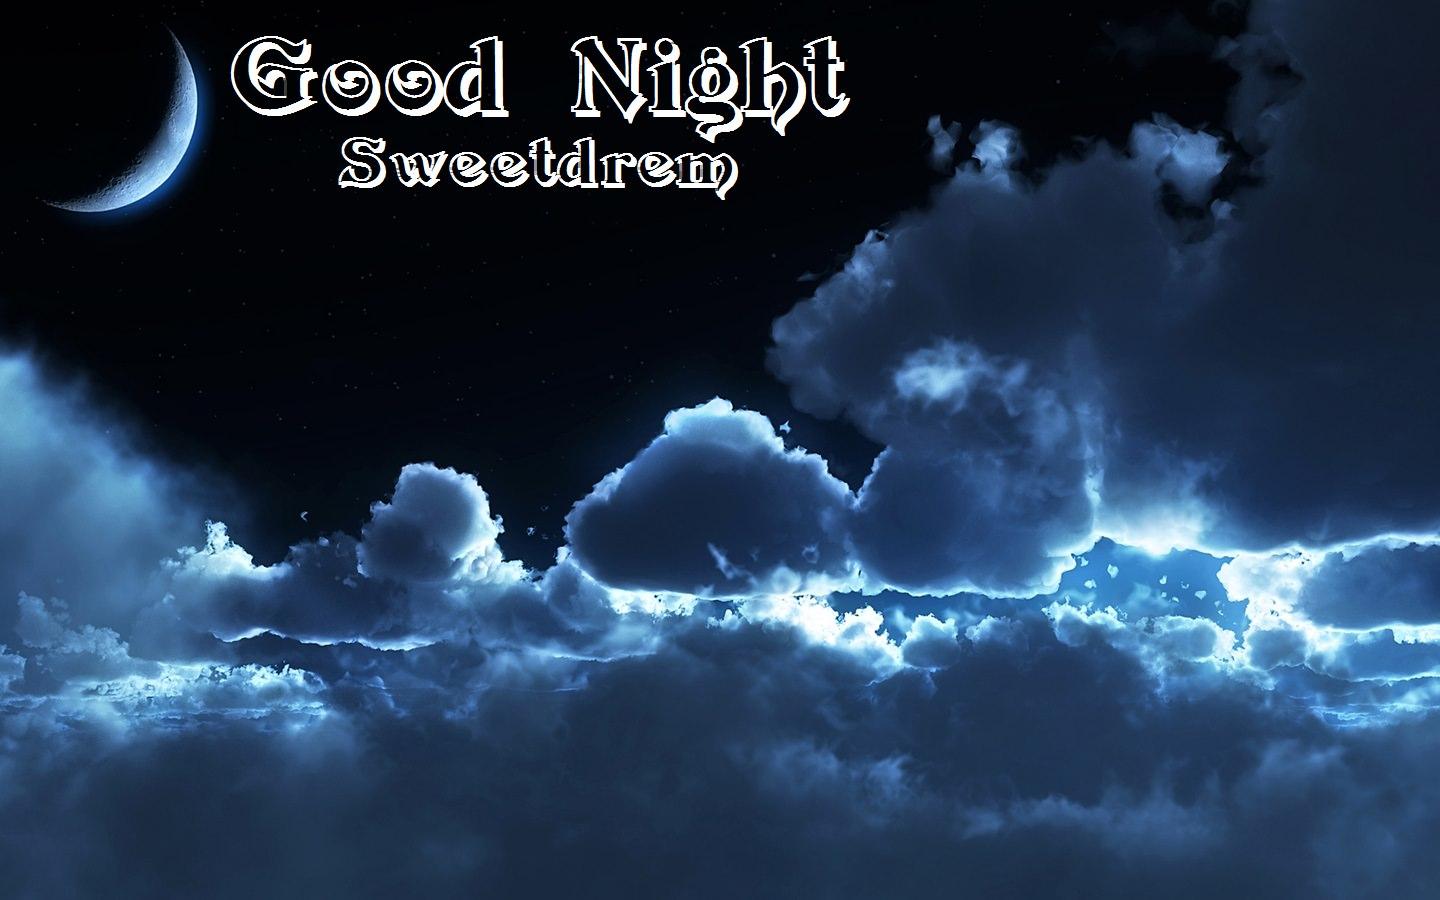 Best Lovely Good Night Messages, Quotes, Sayings and Wallpaper